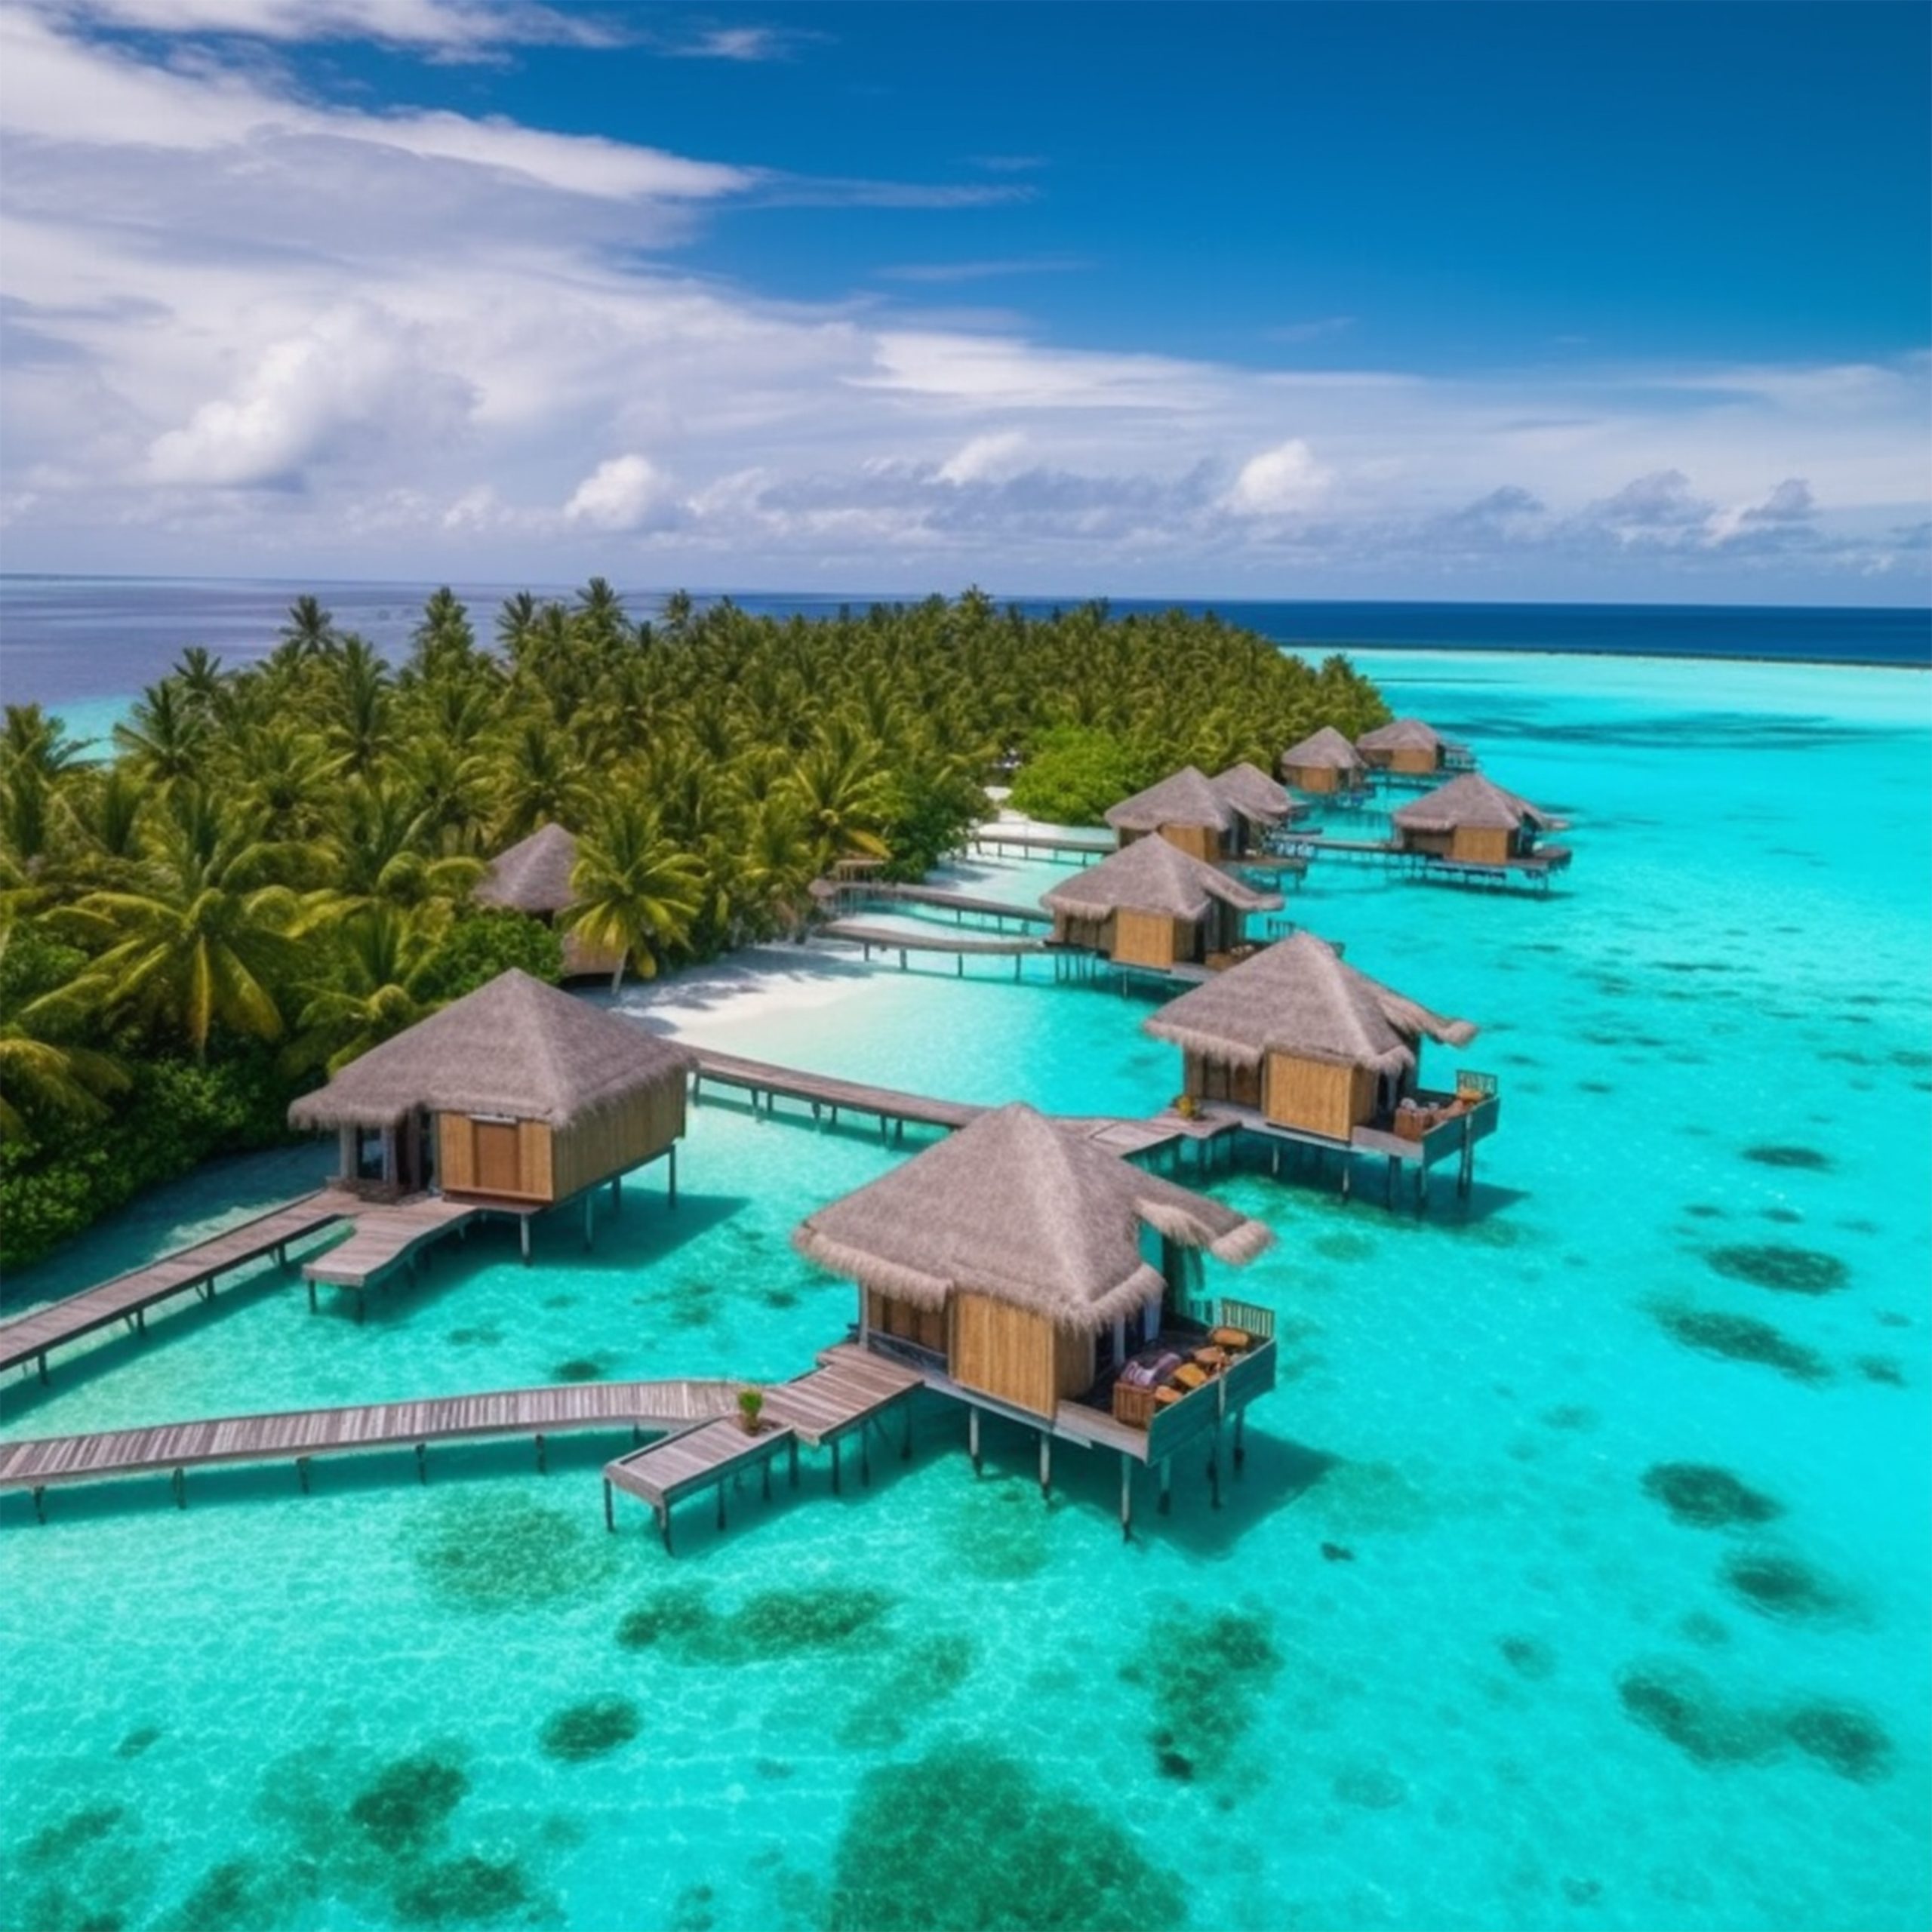 Summer Vacation on a Tropical Island in the Maldives